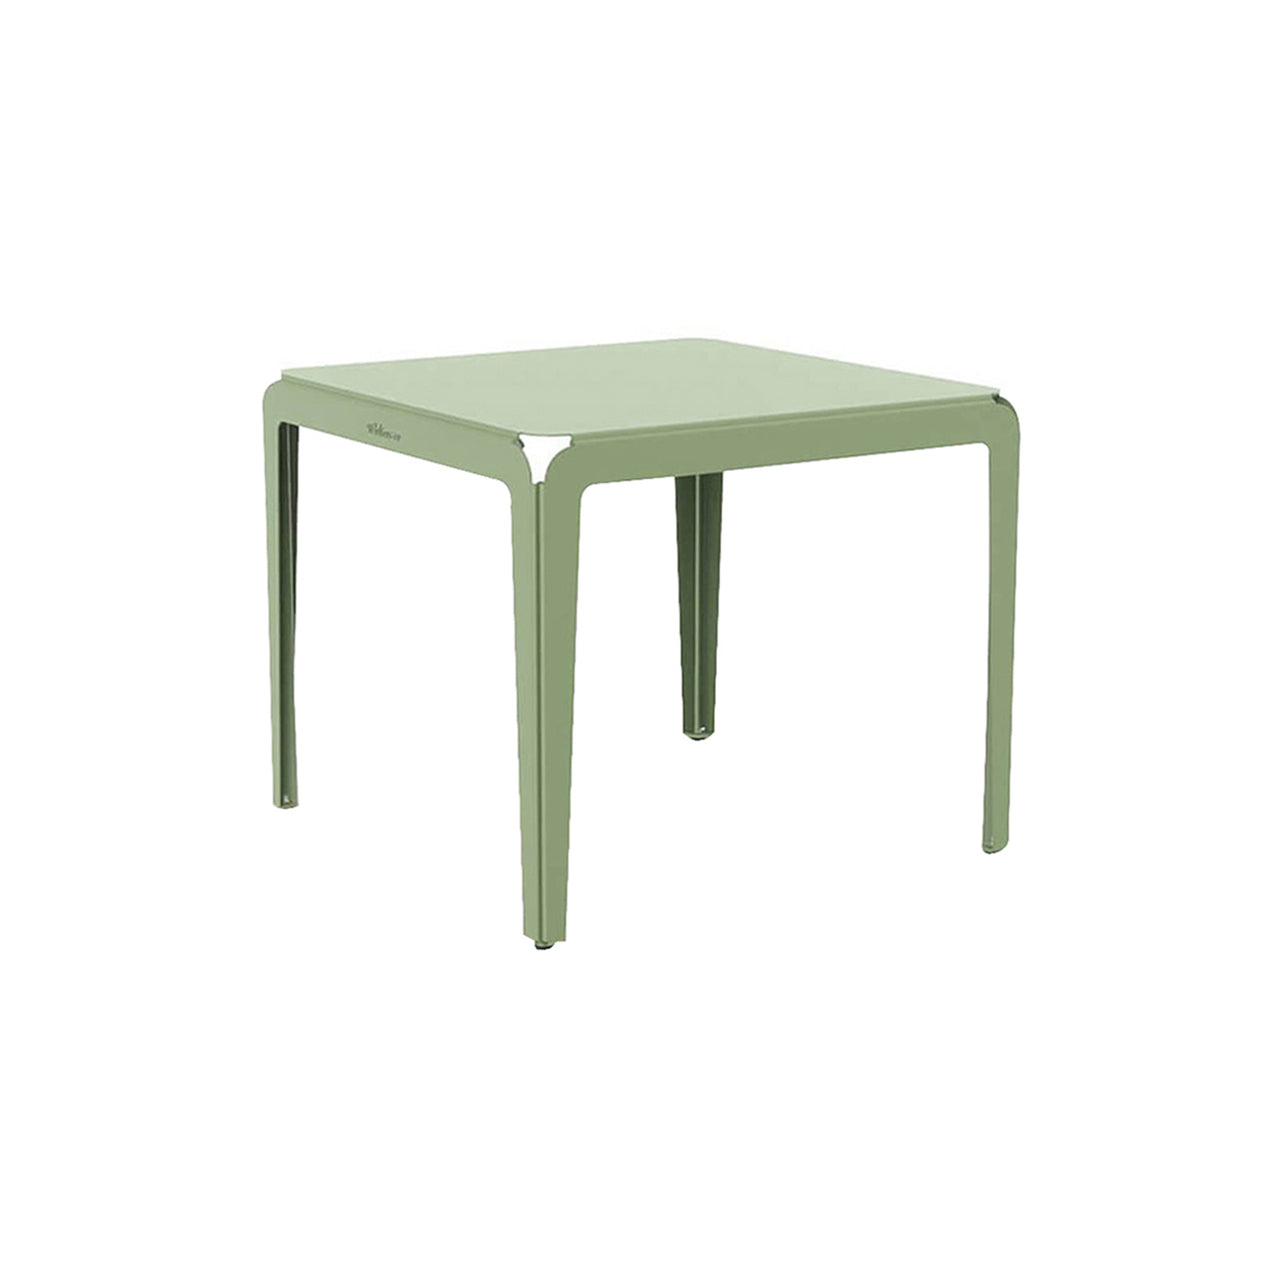 Bended Table: Outdoor + Small - 35.4